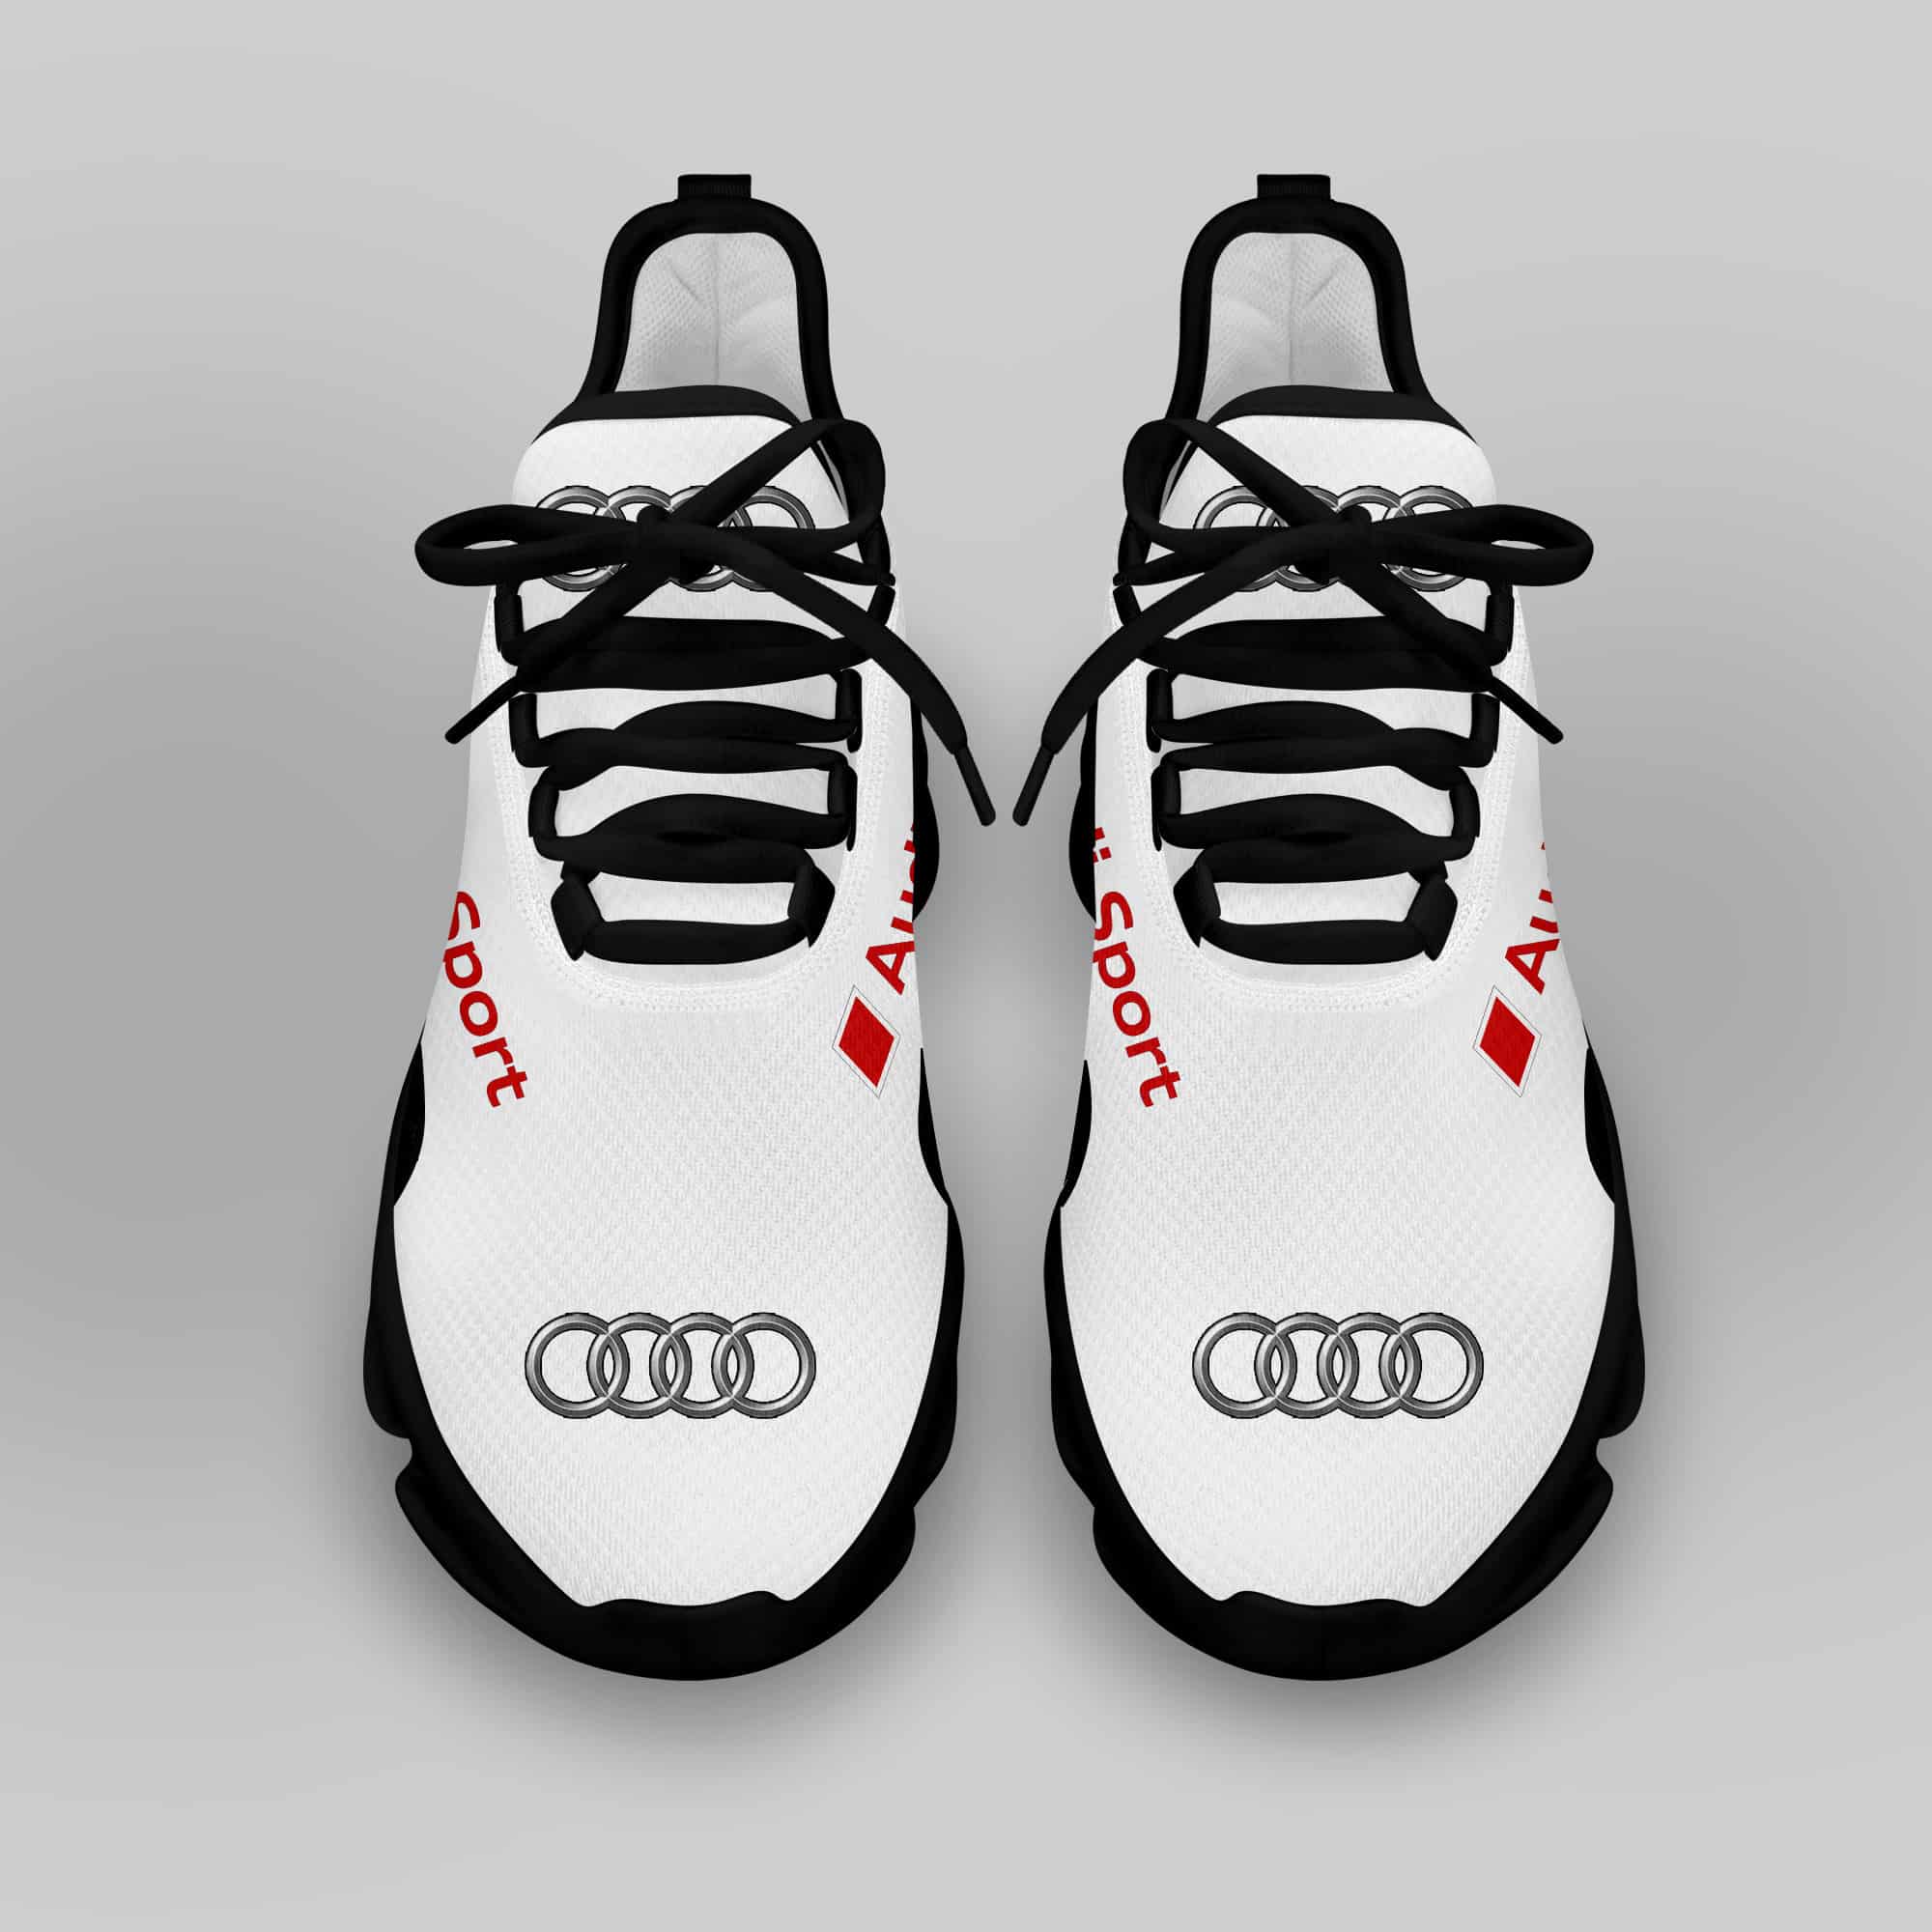 Audi Sport Running Shoes Max Soul Shoes Sneakers Ver 26 4